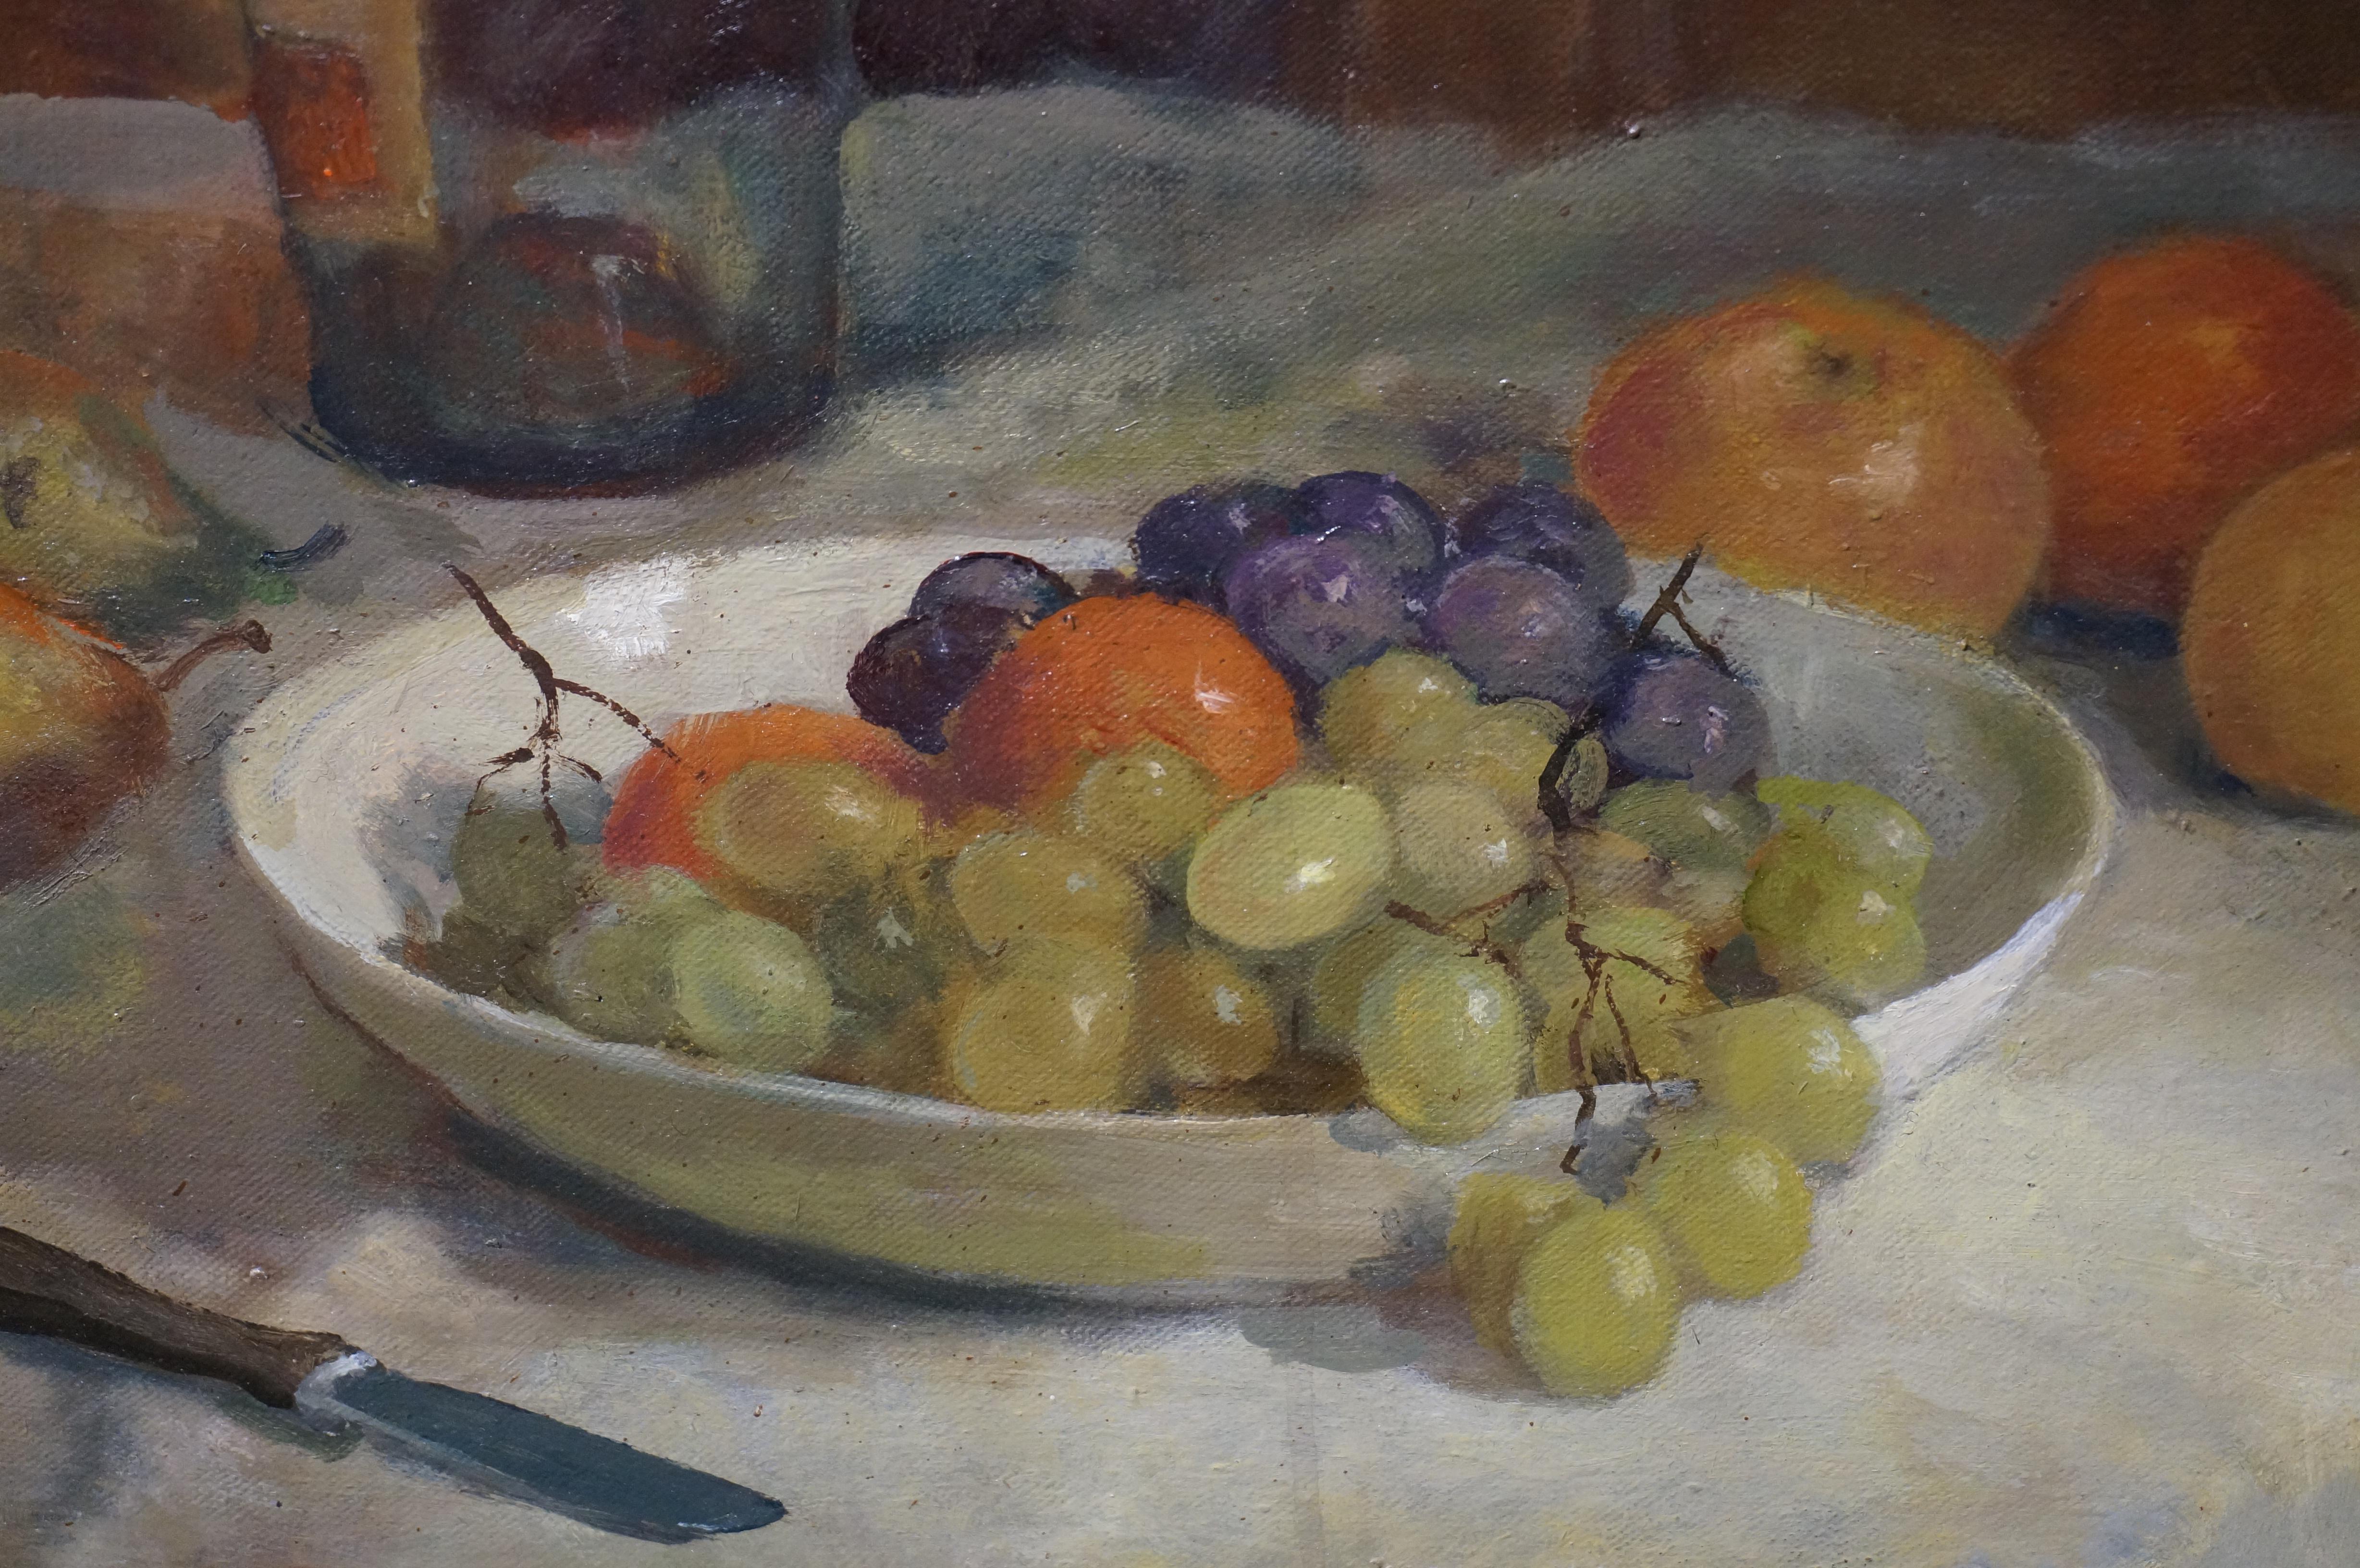 Wim Borkent (1905-1981)
Stillife with grapes
Signed lower left W. Borkent 
Oil on canvas 
Dimensions (without frame): 35 x 38.5 cm.